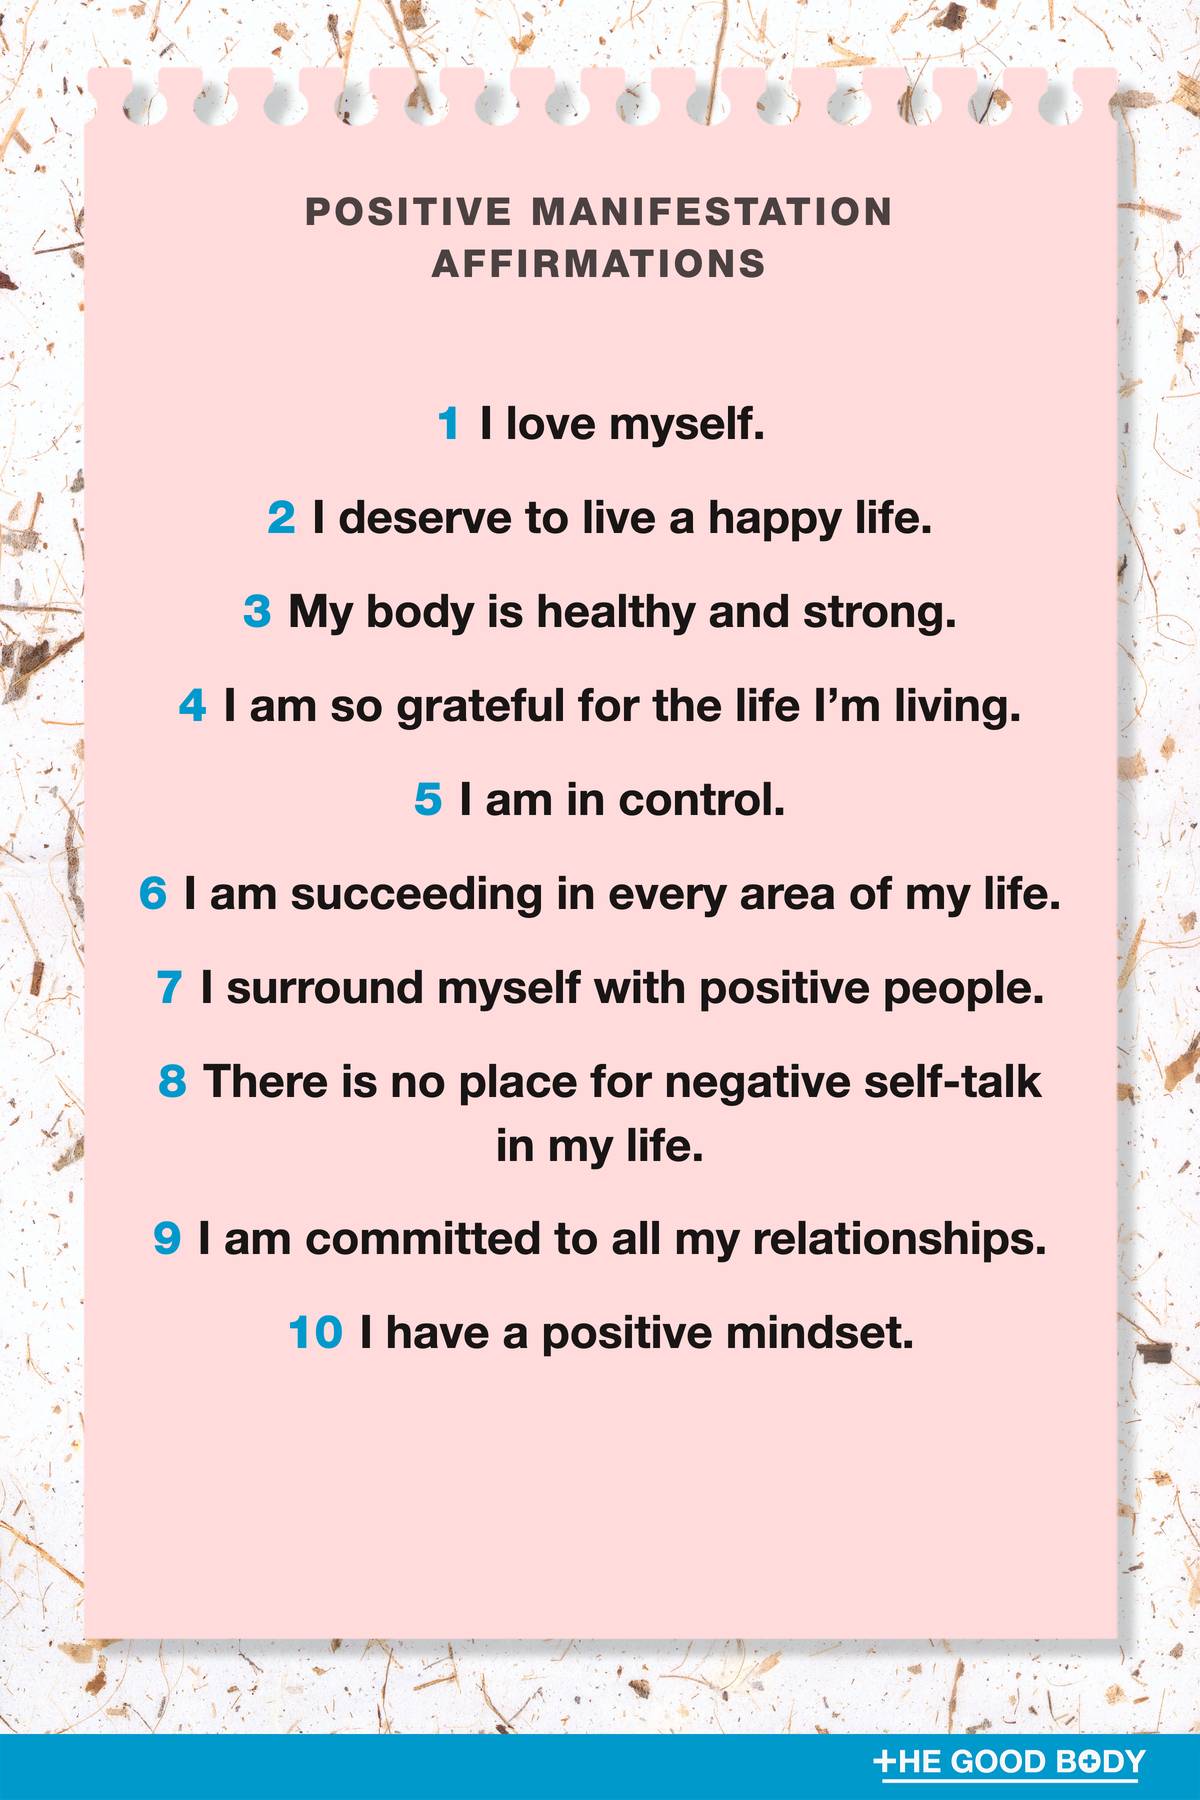 10 Positive Manifestation Affirmations on Pink Note Paper with Recycled Paper Background